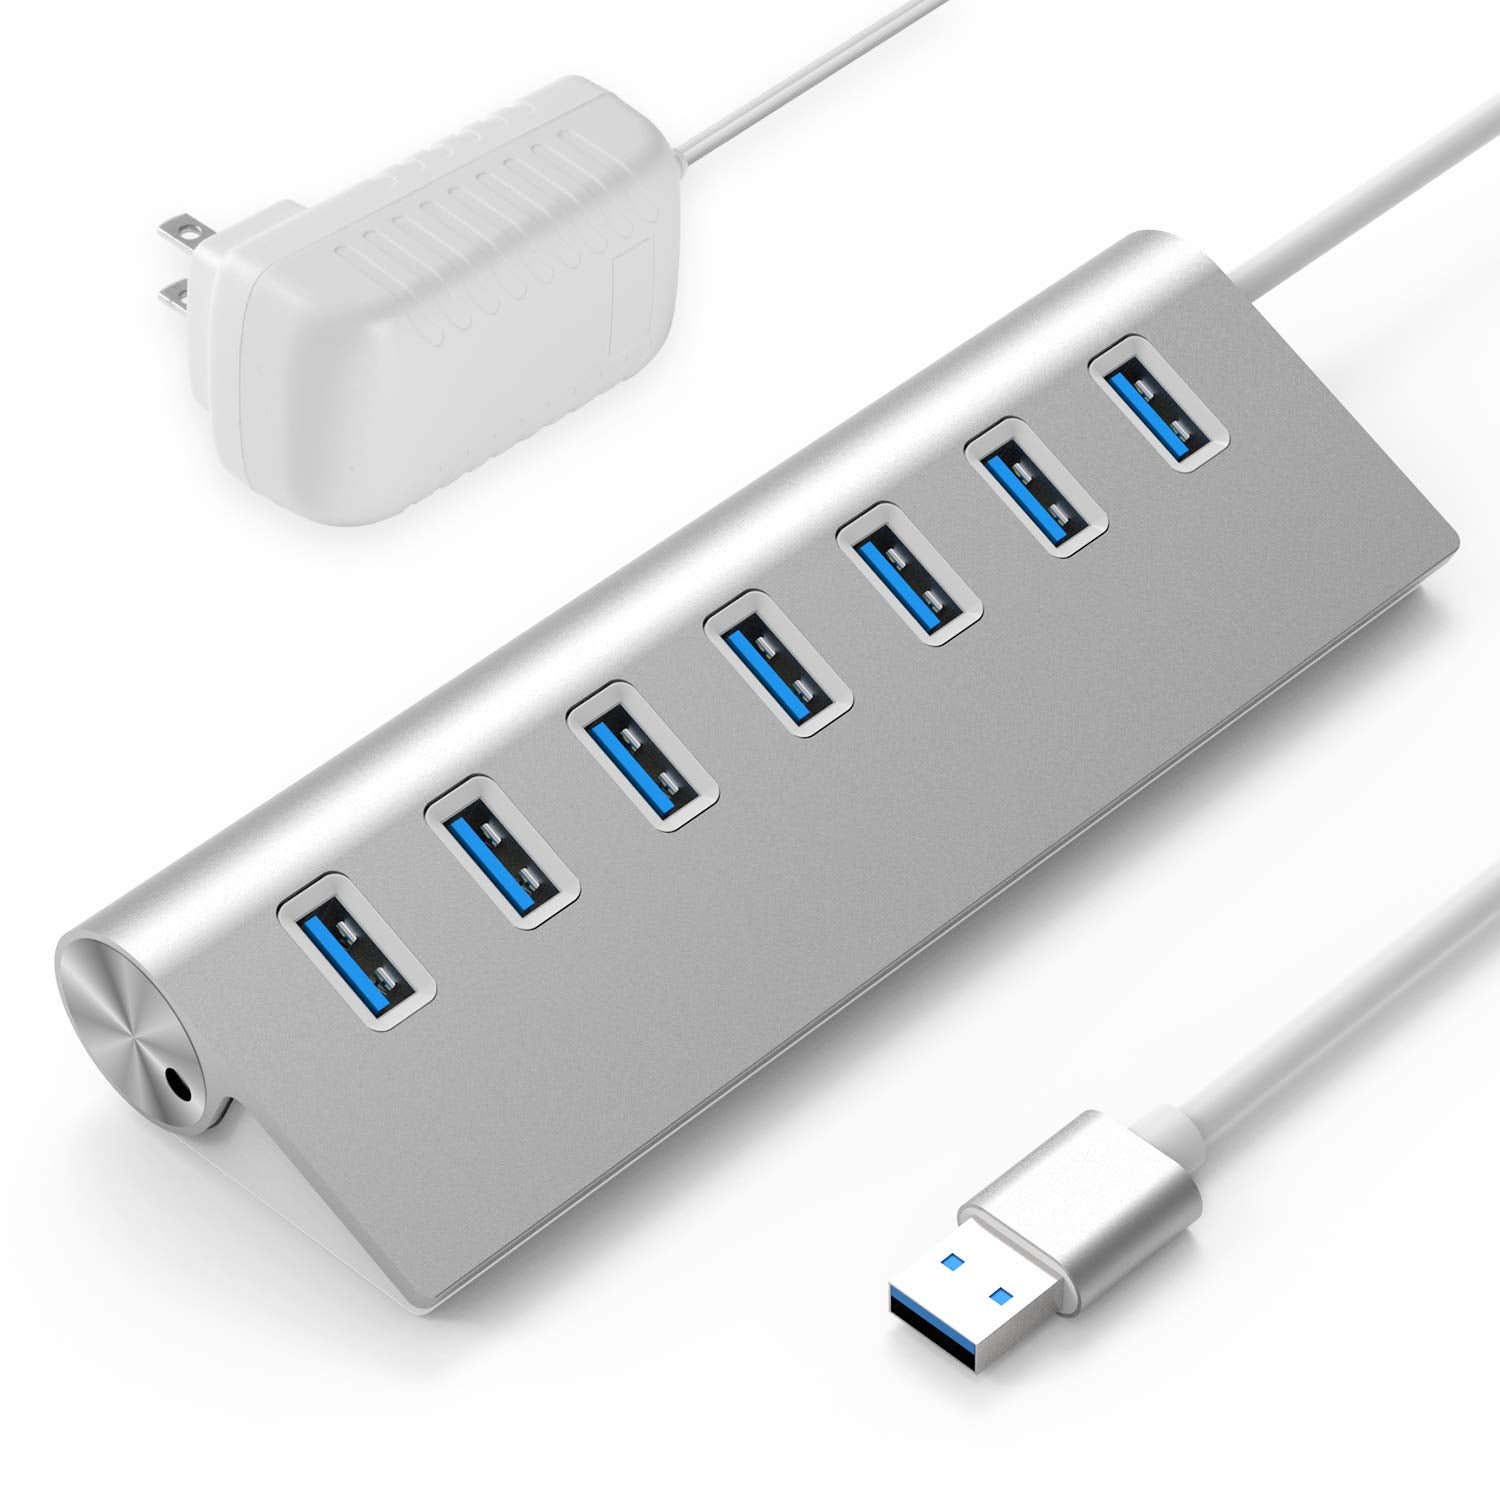 VEMONT USB hub, Aluminum USB 3.0 Data Hub with Individual On/Off Switches  and LED Lights for Laptop, PC, Computer (4ft/120cm) (7port)